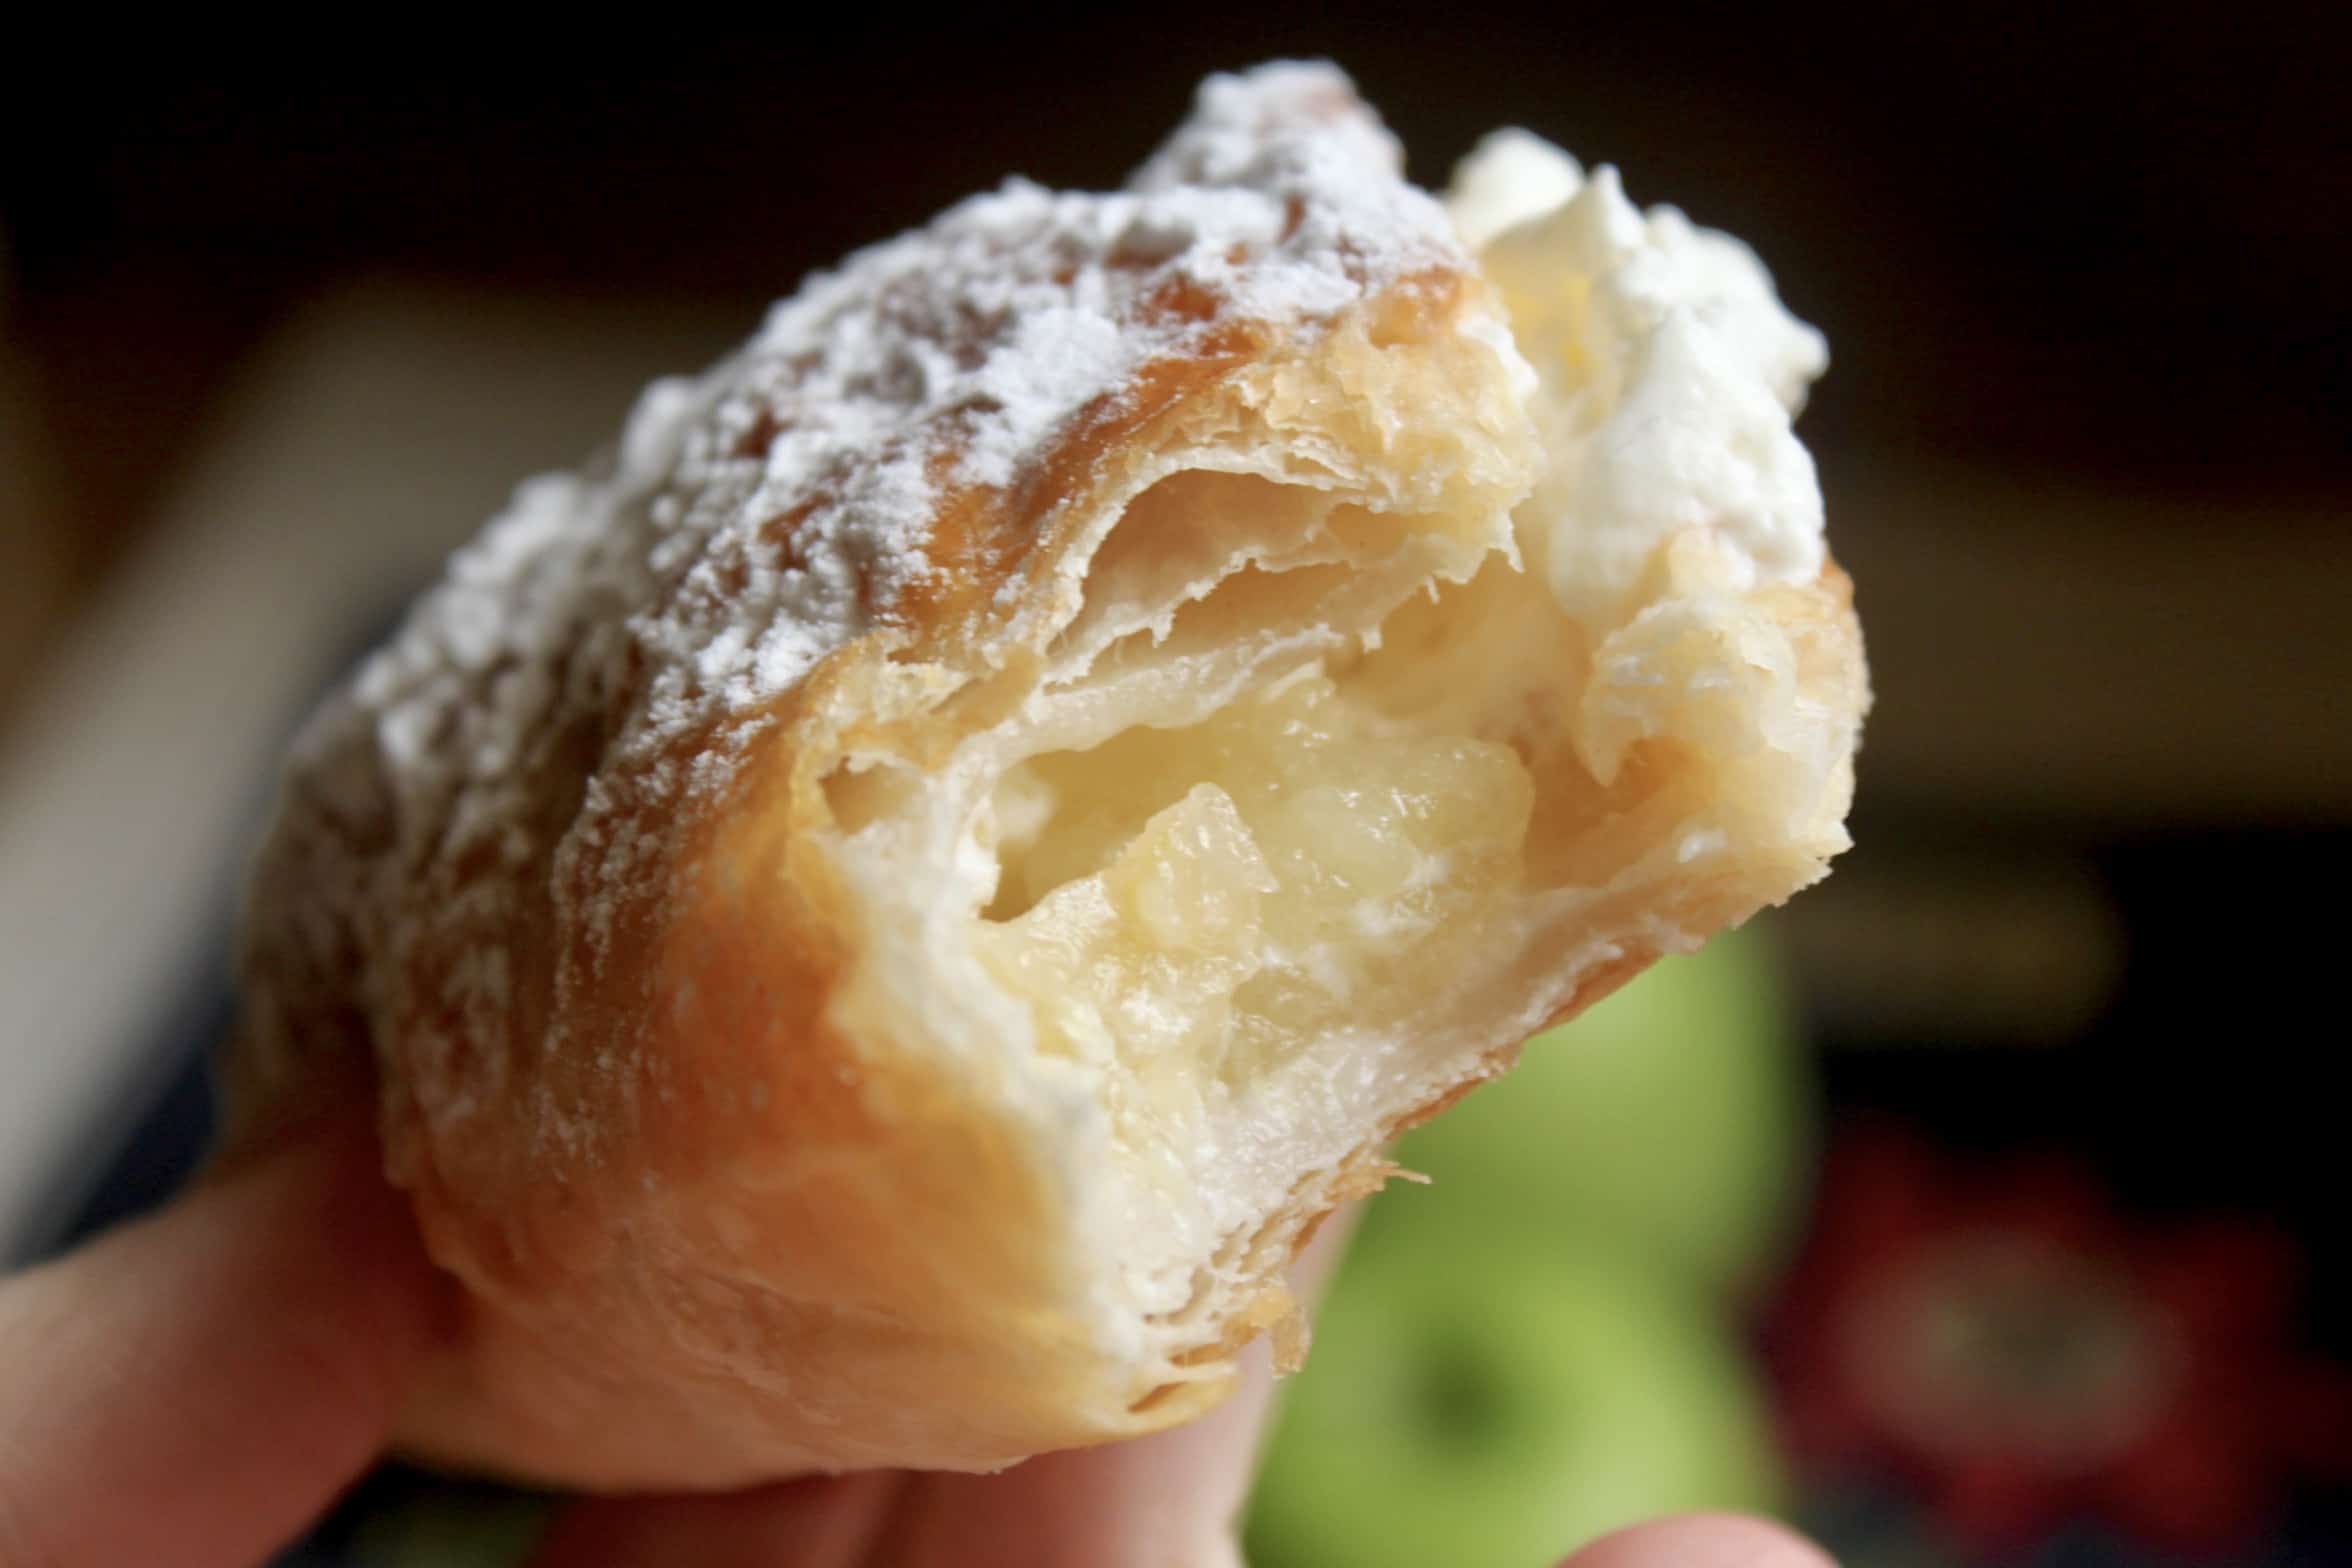 apple turnover showing the apple and cream in the middle